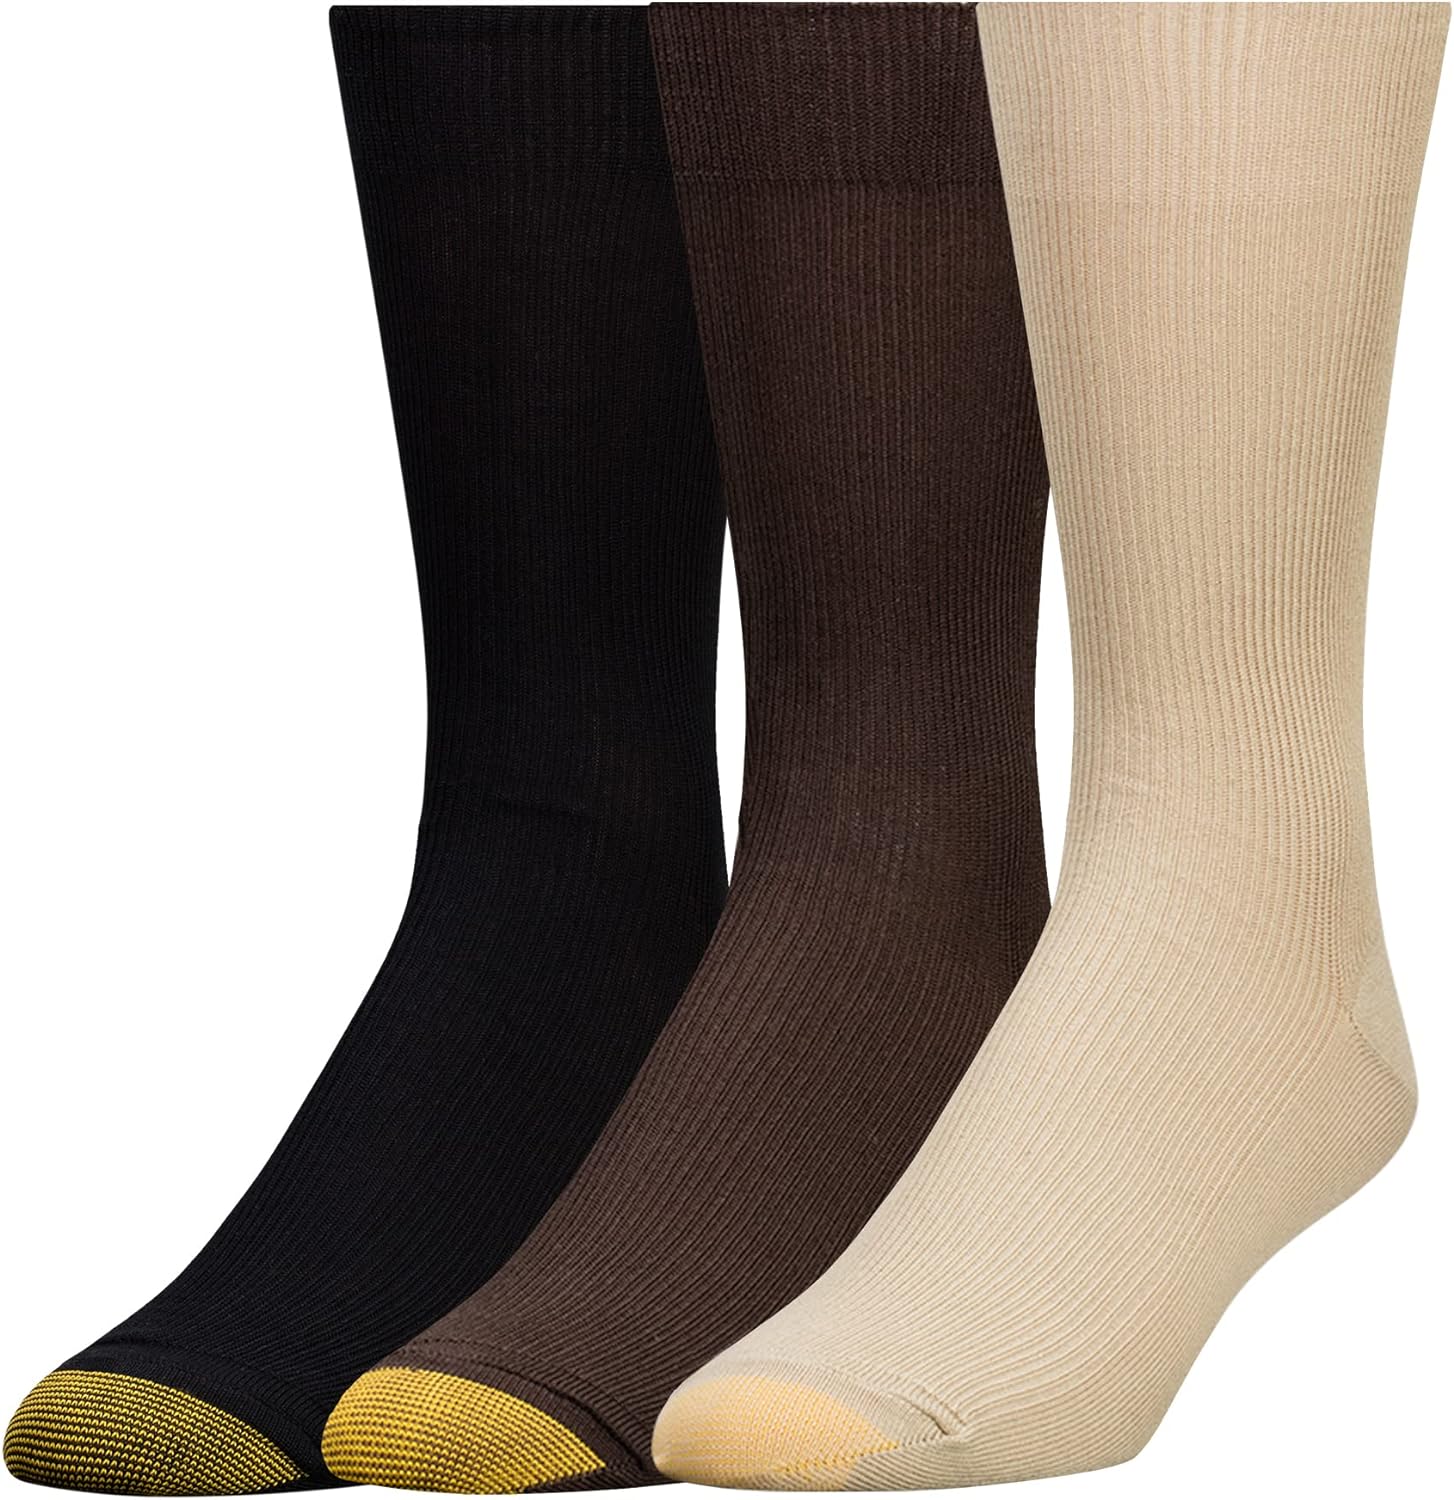 These are great dress socks I can even wear with sneakers, They fit and are sized very well especially for big pontoons like my feet are. They're well-made, of comfortable material.